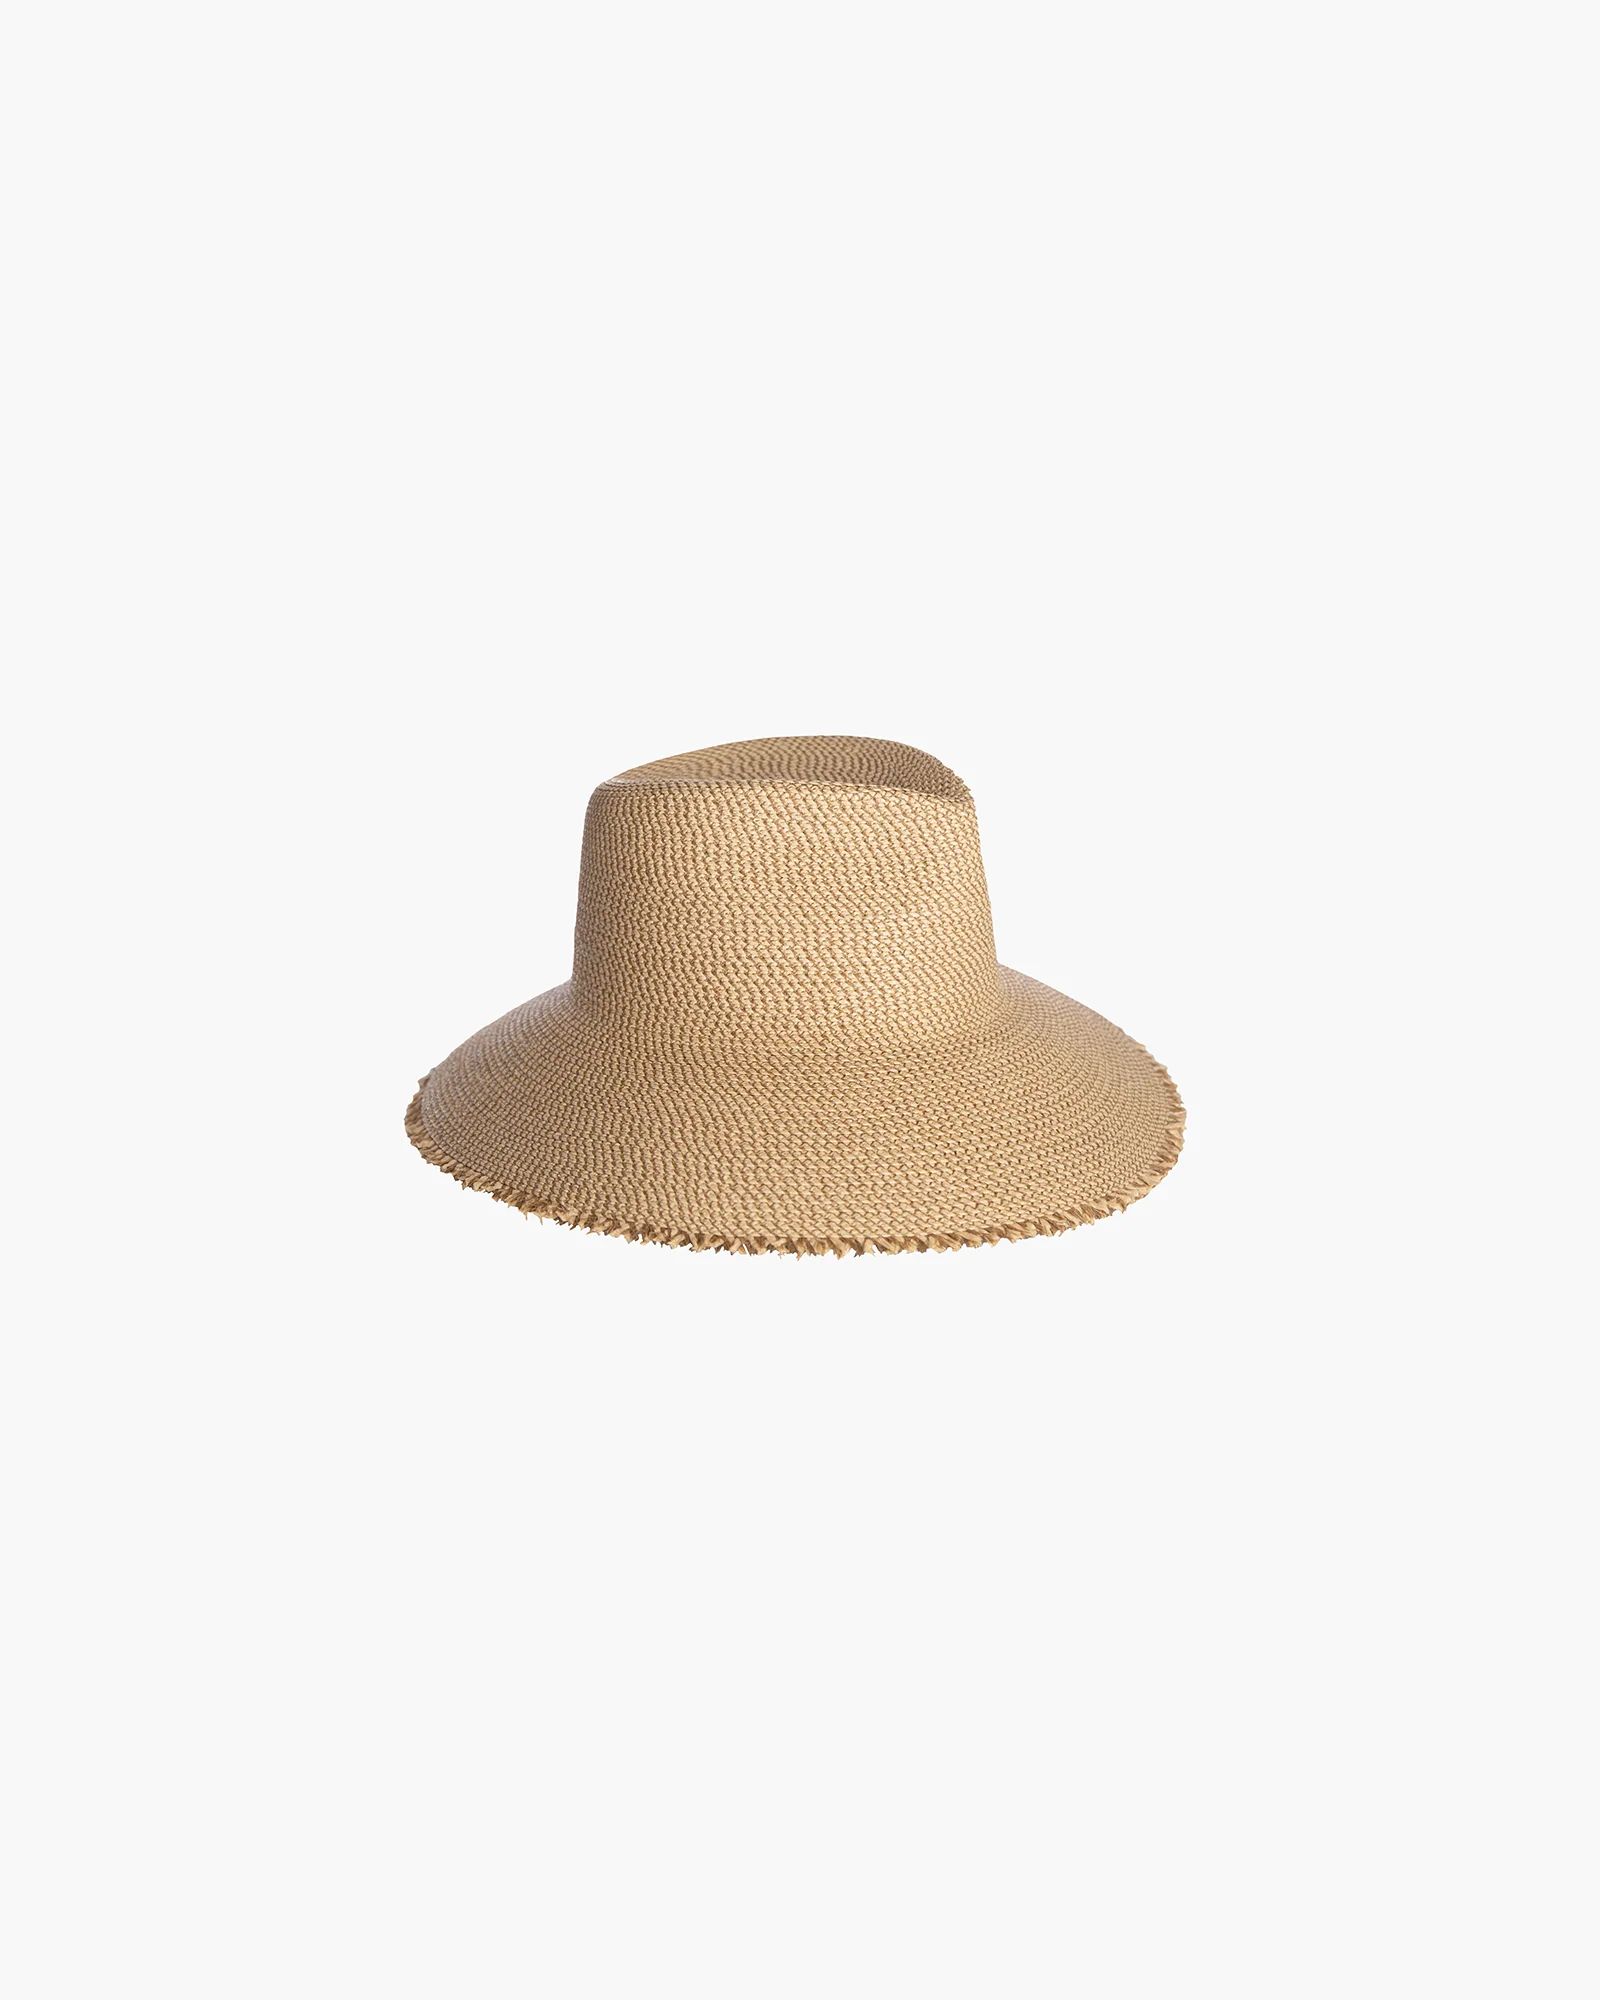 Squishee® A List - Packable Fedora Hat | Eric Javits